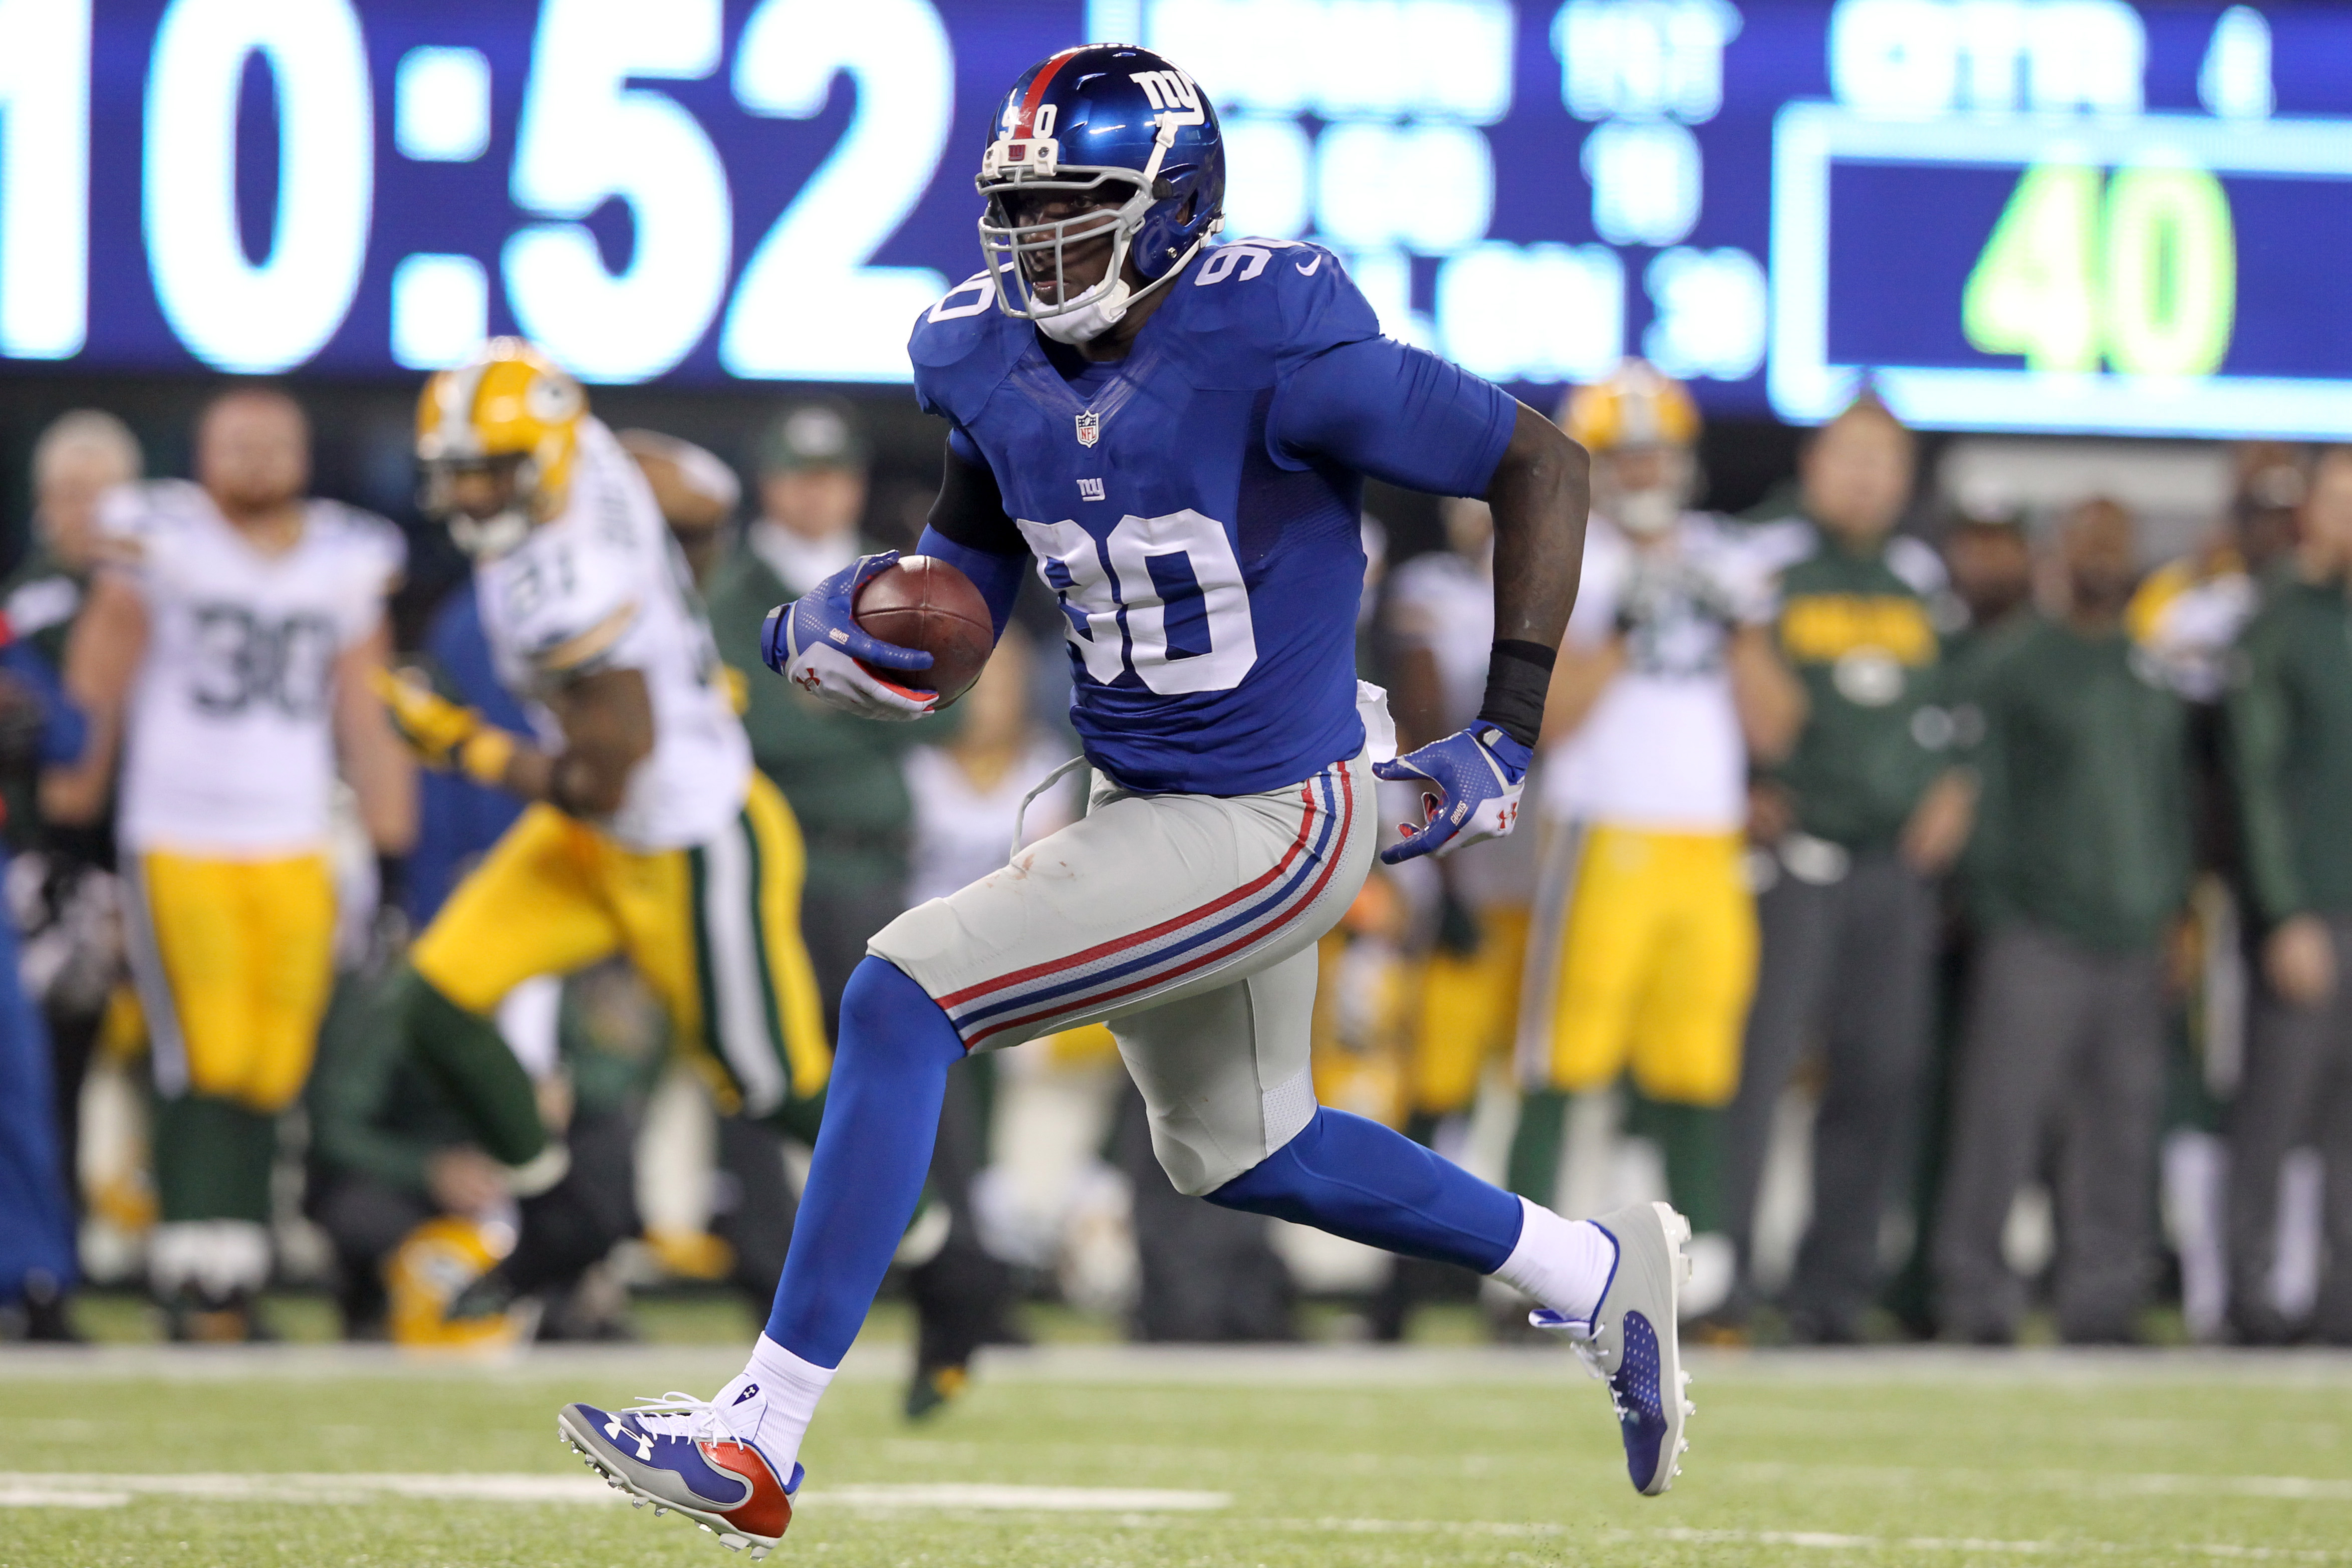 New York Giants defensive end Jason Pierre-Paul runs back an interception against the Green Bay Packers for a touchdown during the fourth quarter of a game at MetLife Stadium on November 17, 2013. (Reuters/USA Today Sports—Brad Penner)